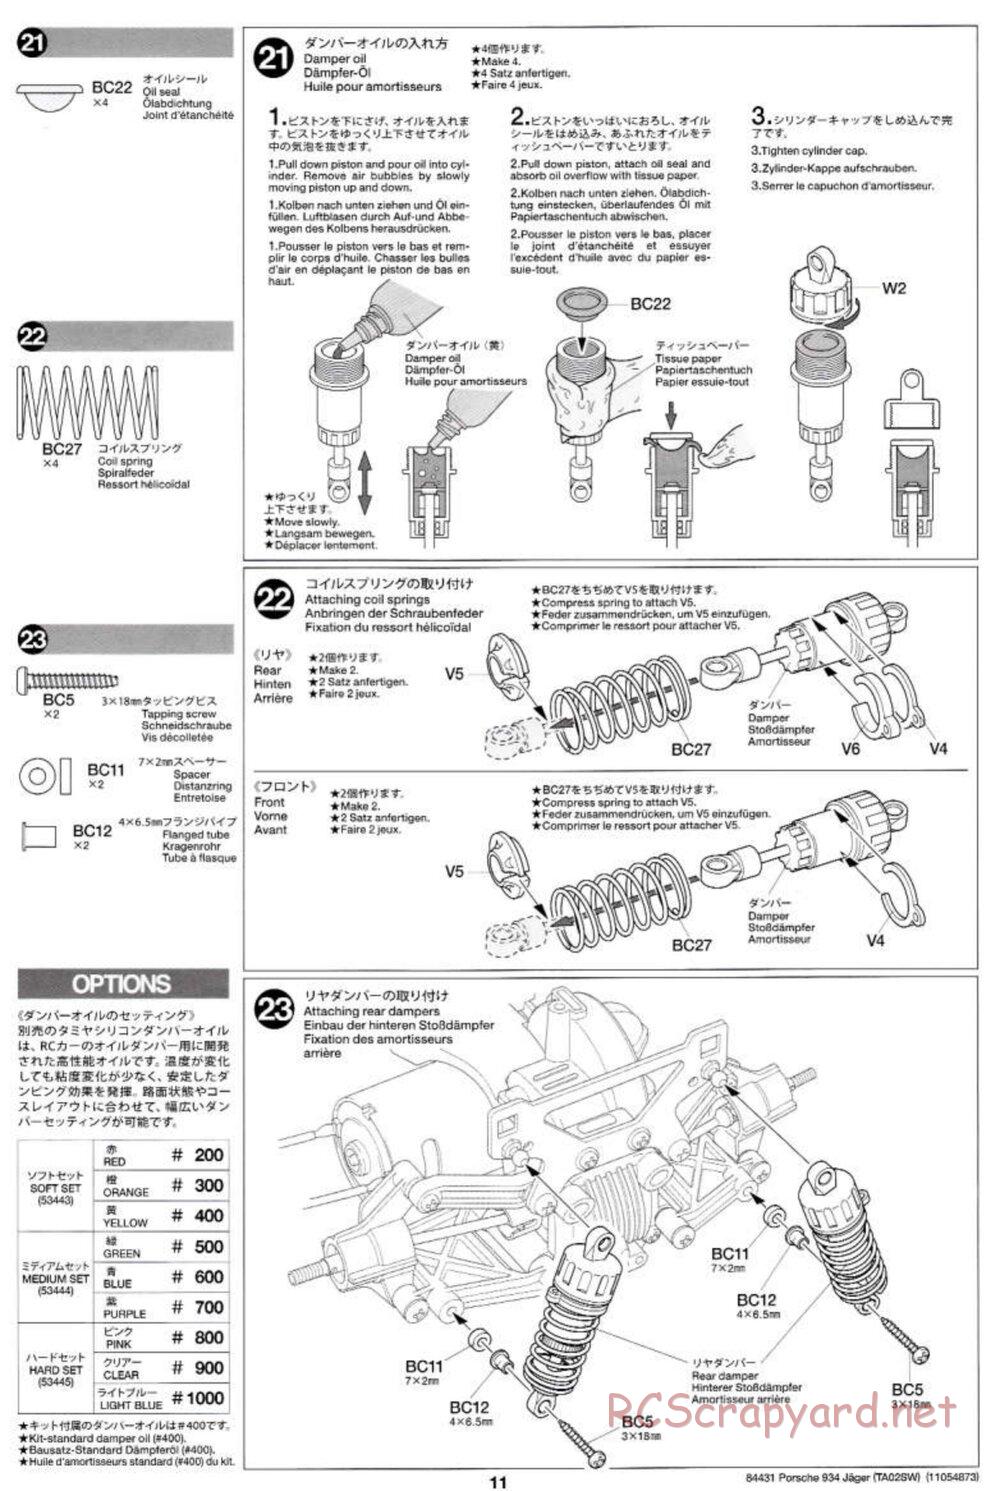 Tamiya - Porsche Turbo RSR Type 934 Jagermeister - TA-02SW Chassis - Manual - Page 11